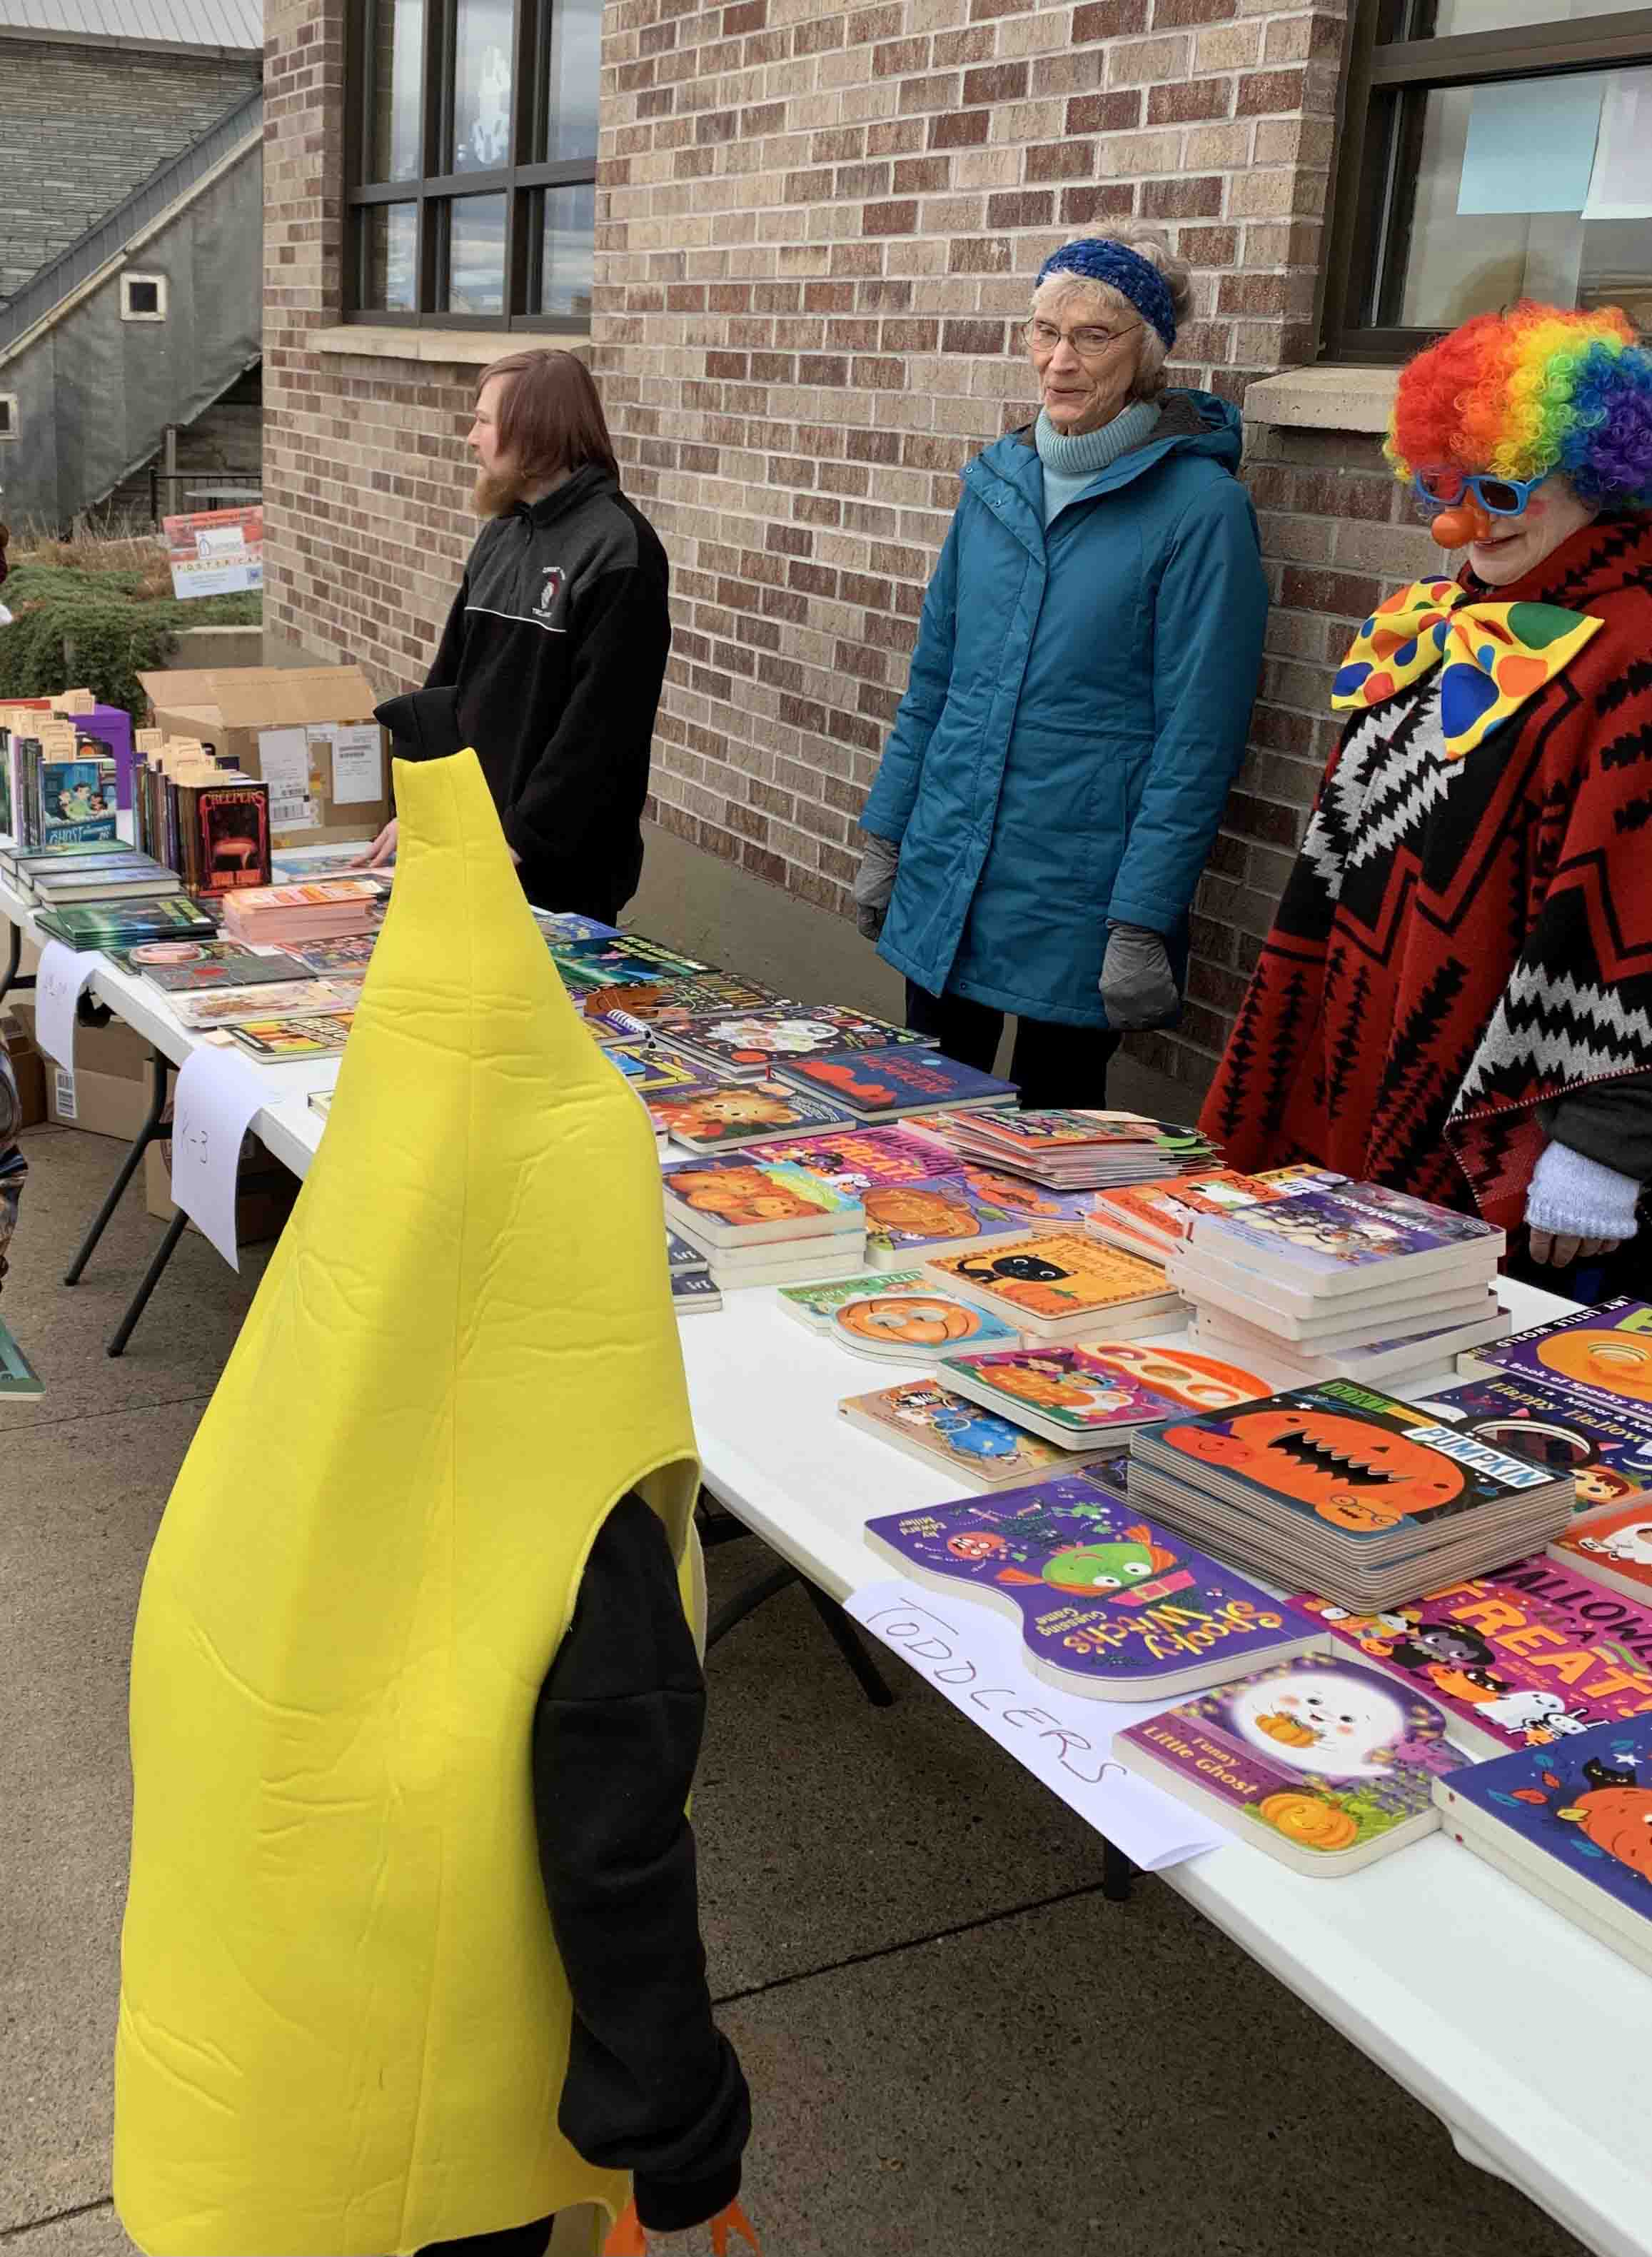 2023 Banana Slips in to get a book